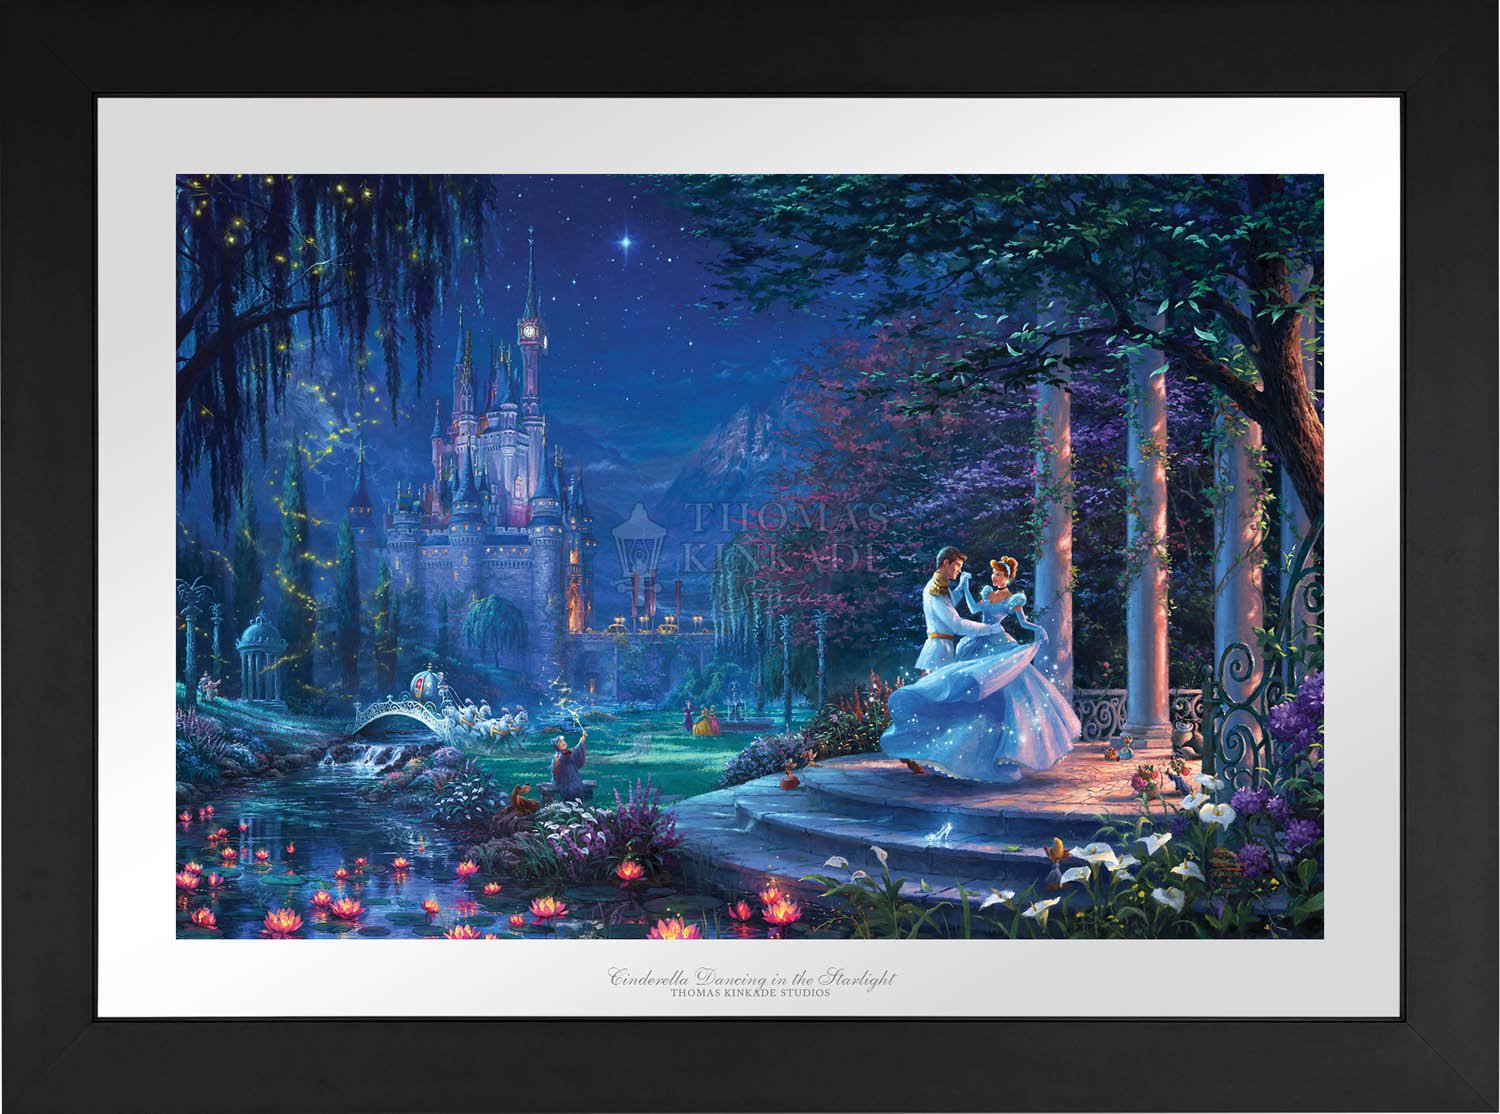 Cinderella's dreams have come true under the starlight Cinderella is in the arms of her prince - Satin Black Frameme